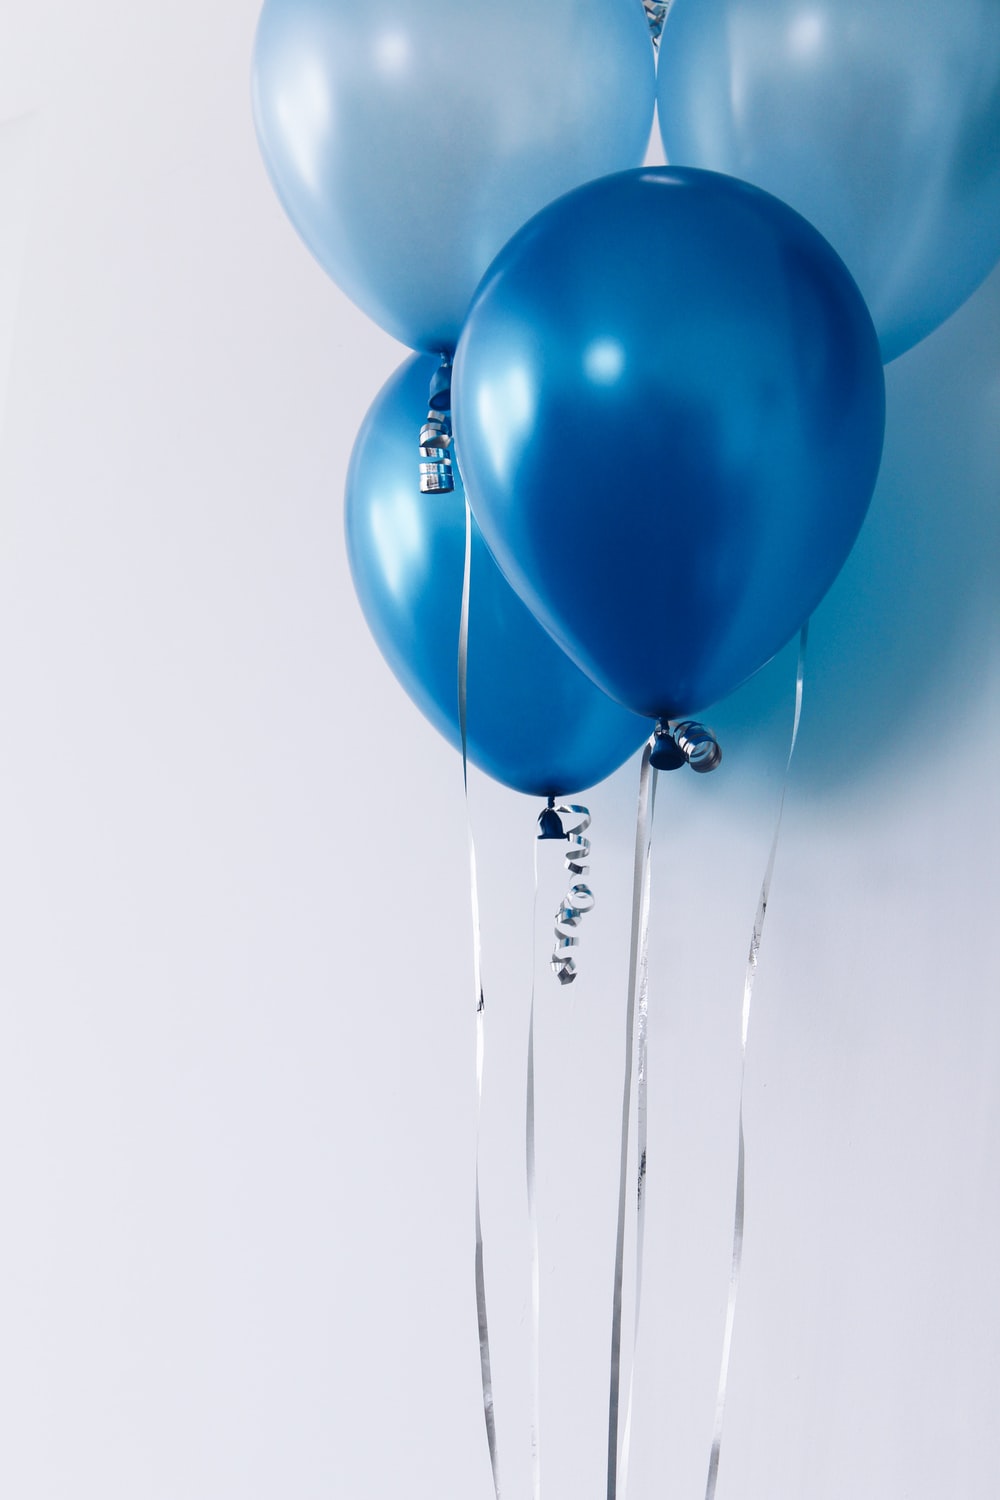 Birthday Balloons Picture. Download Free Image